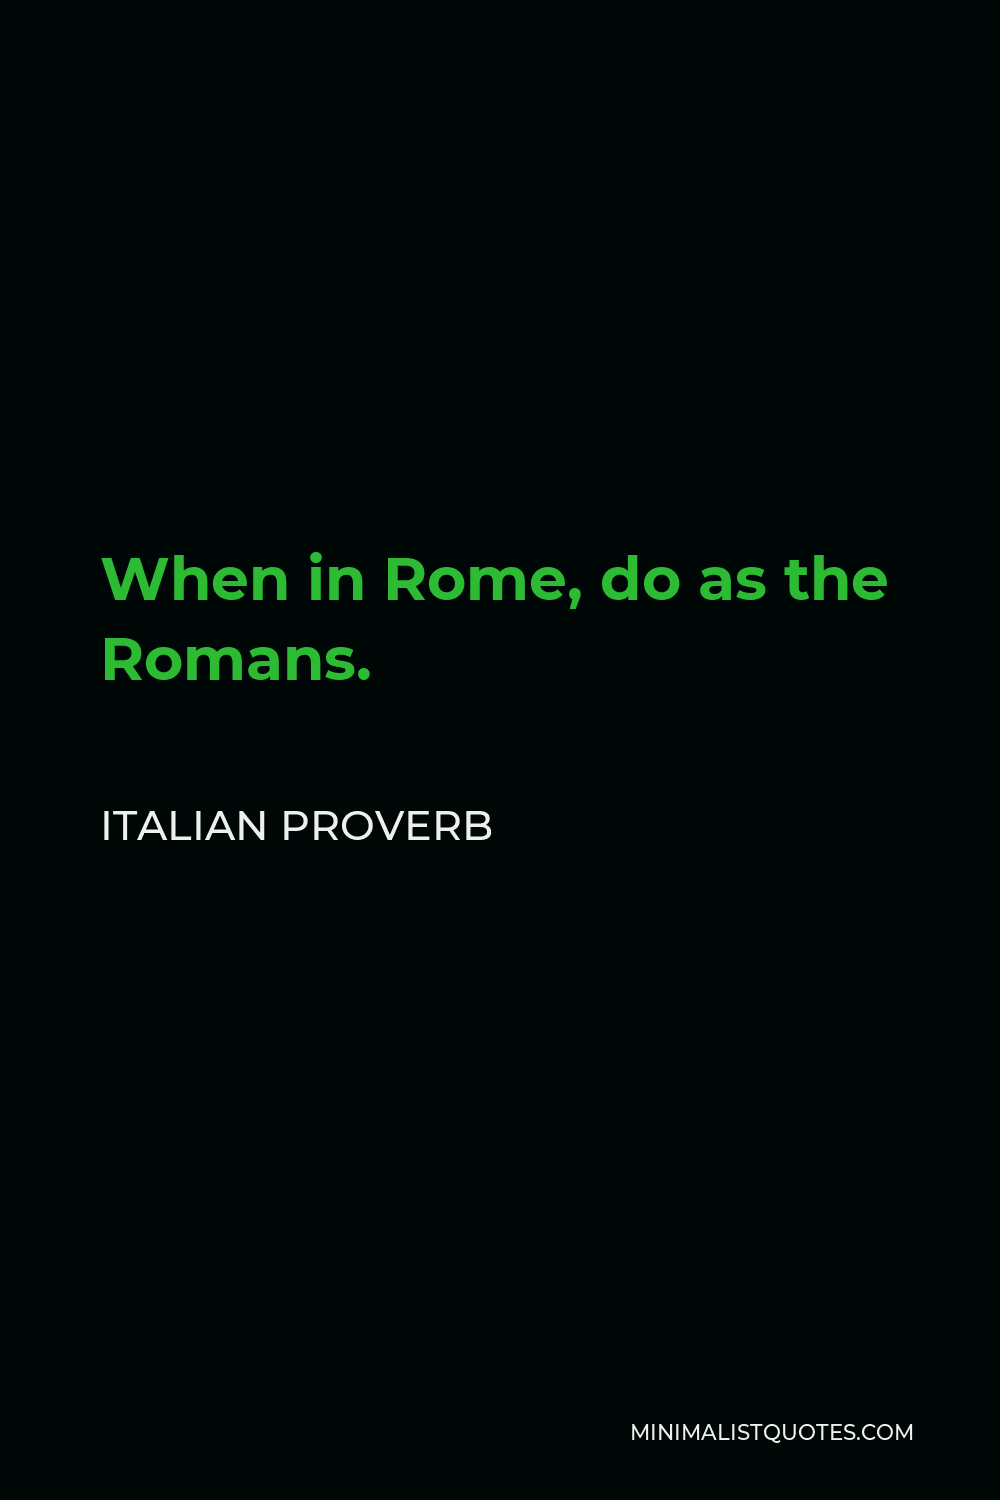 Italian Proverb Quote - When in Rome, do as the Romans.